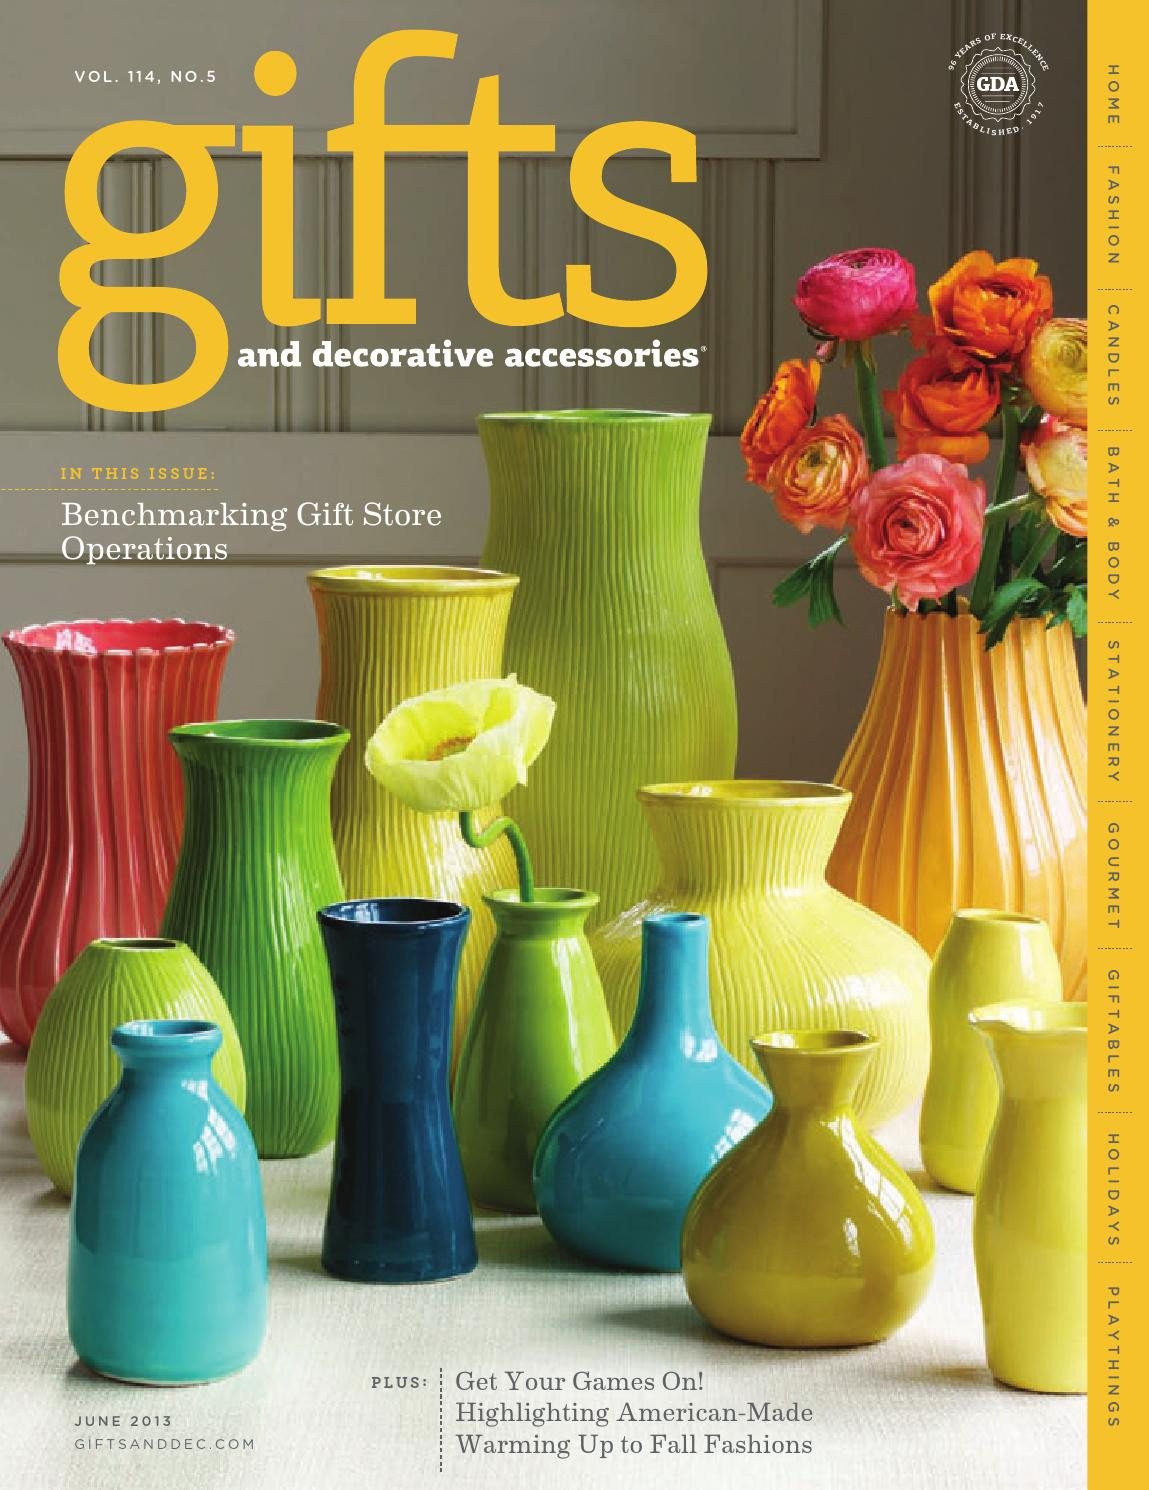 Simon Pearce Chelsea Vase Of Gda June2013r by Sandow Media issuu Throughout Page 1